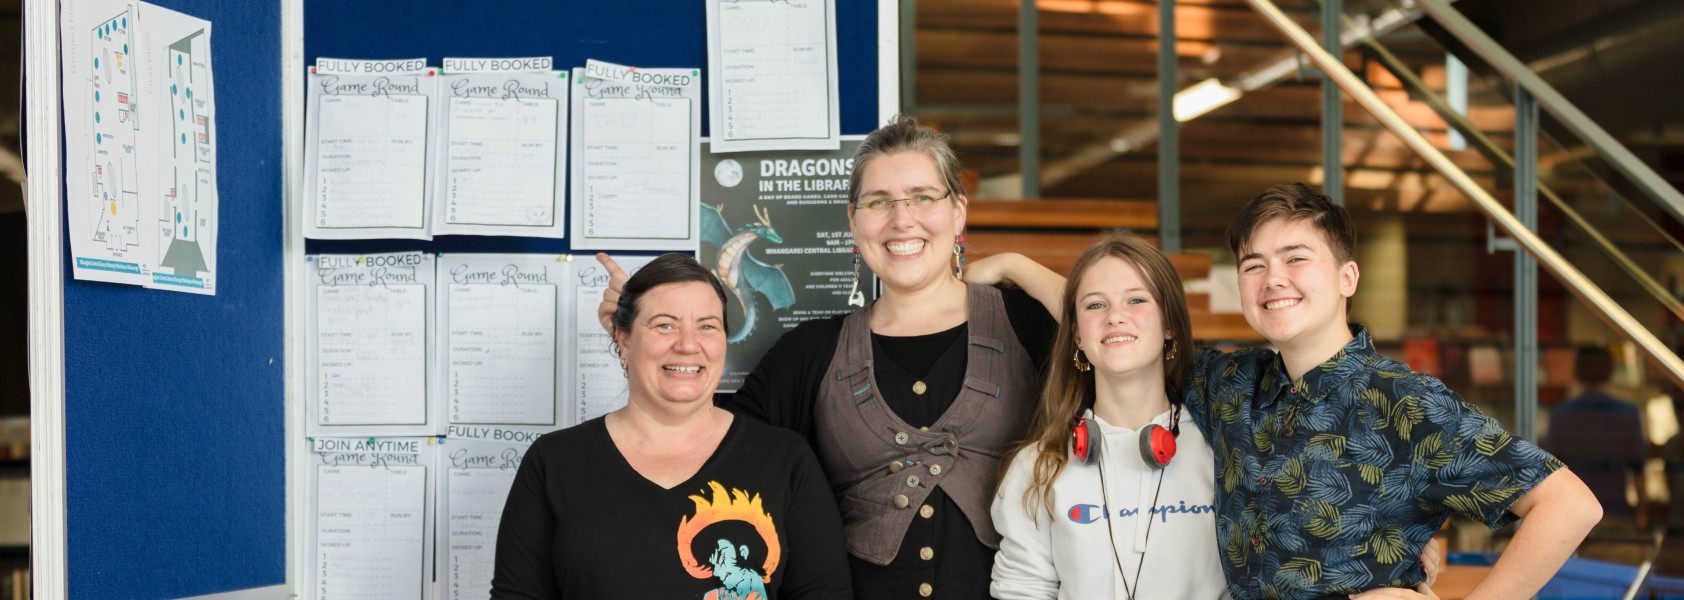 Four smiling people in the library, standing in front of a black board with game descriptions.